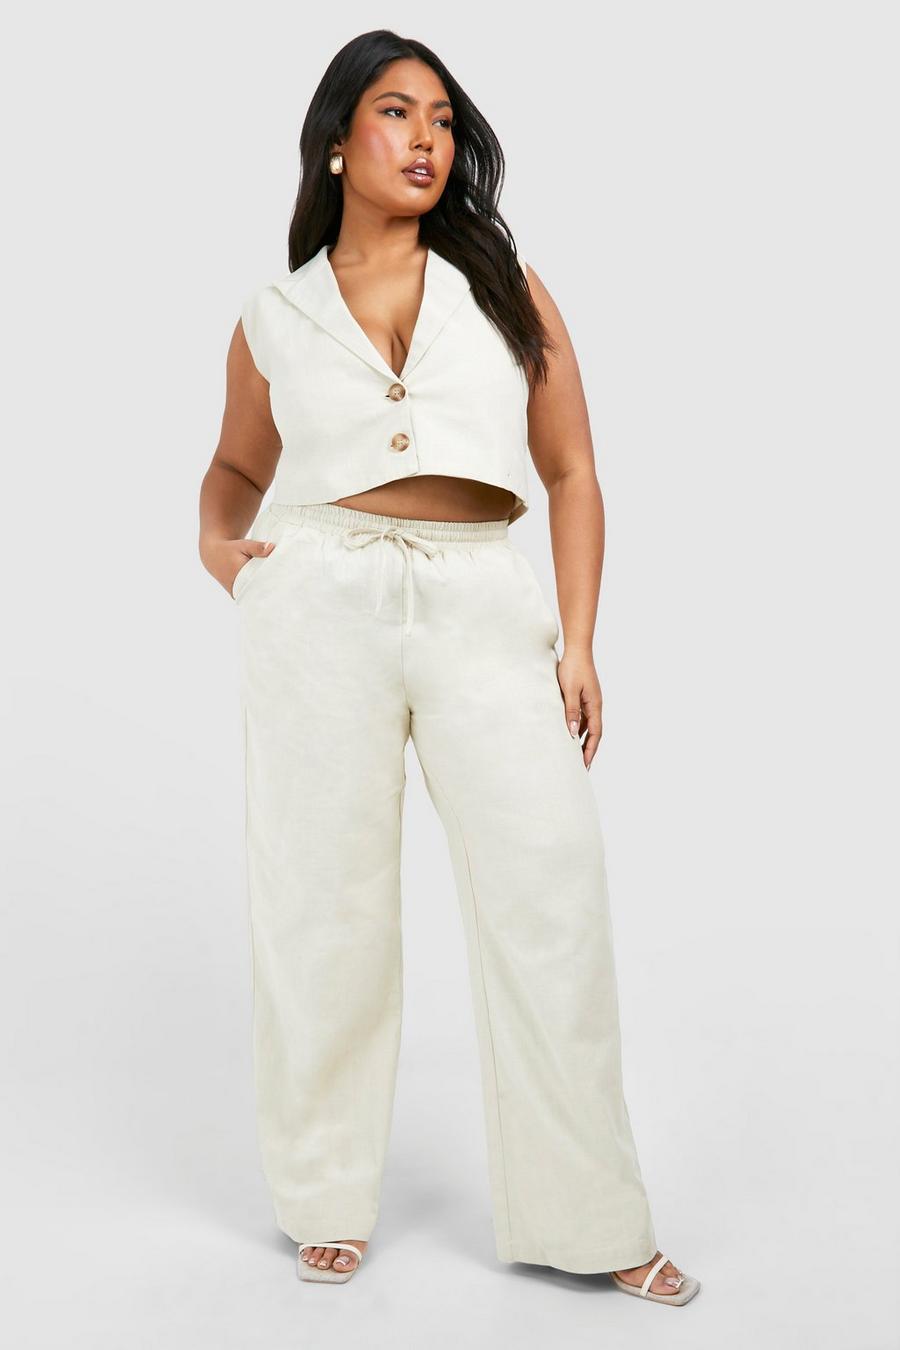 Plus Size Pants Sale Up To 70% Off